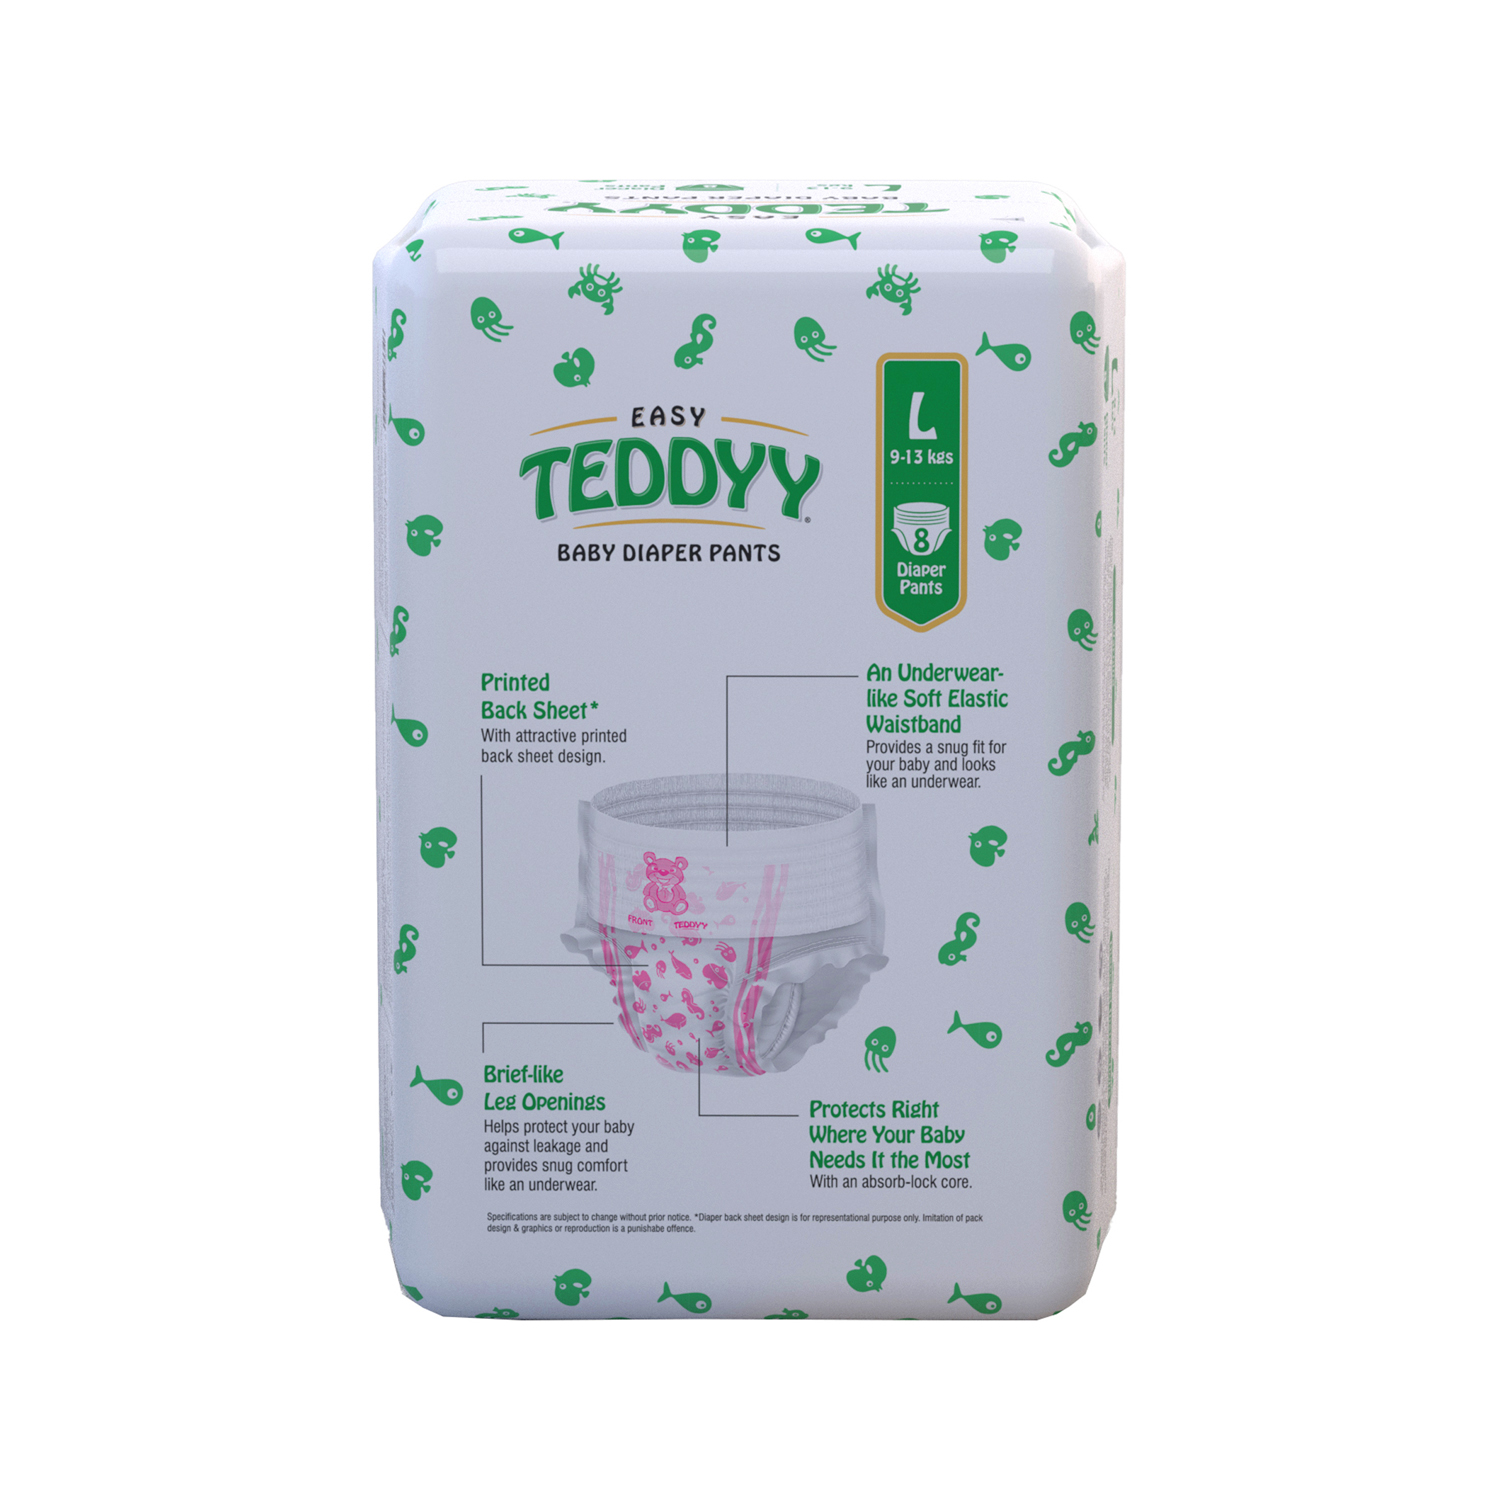 Teddyy Baby Diapers Pant Price | diapers wholesale price | best baby diapers  | #diapers - YouTube